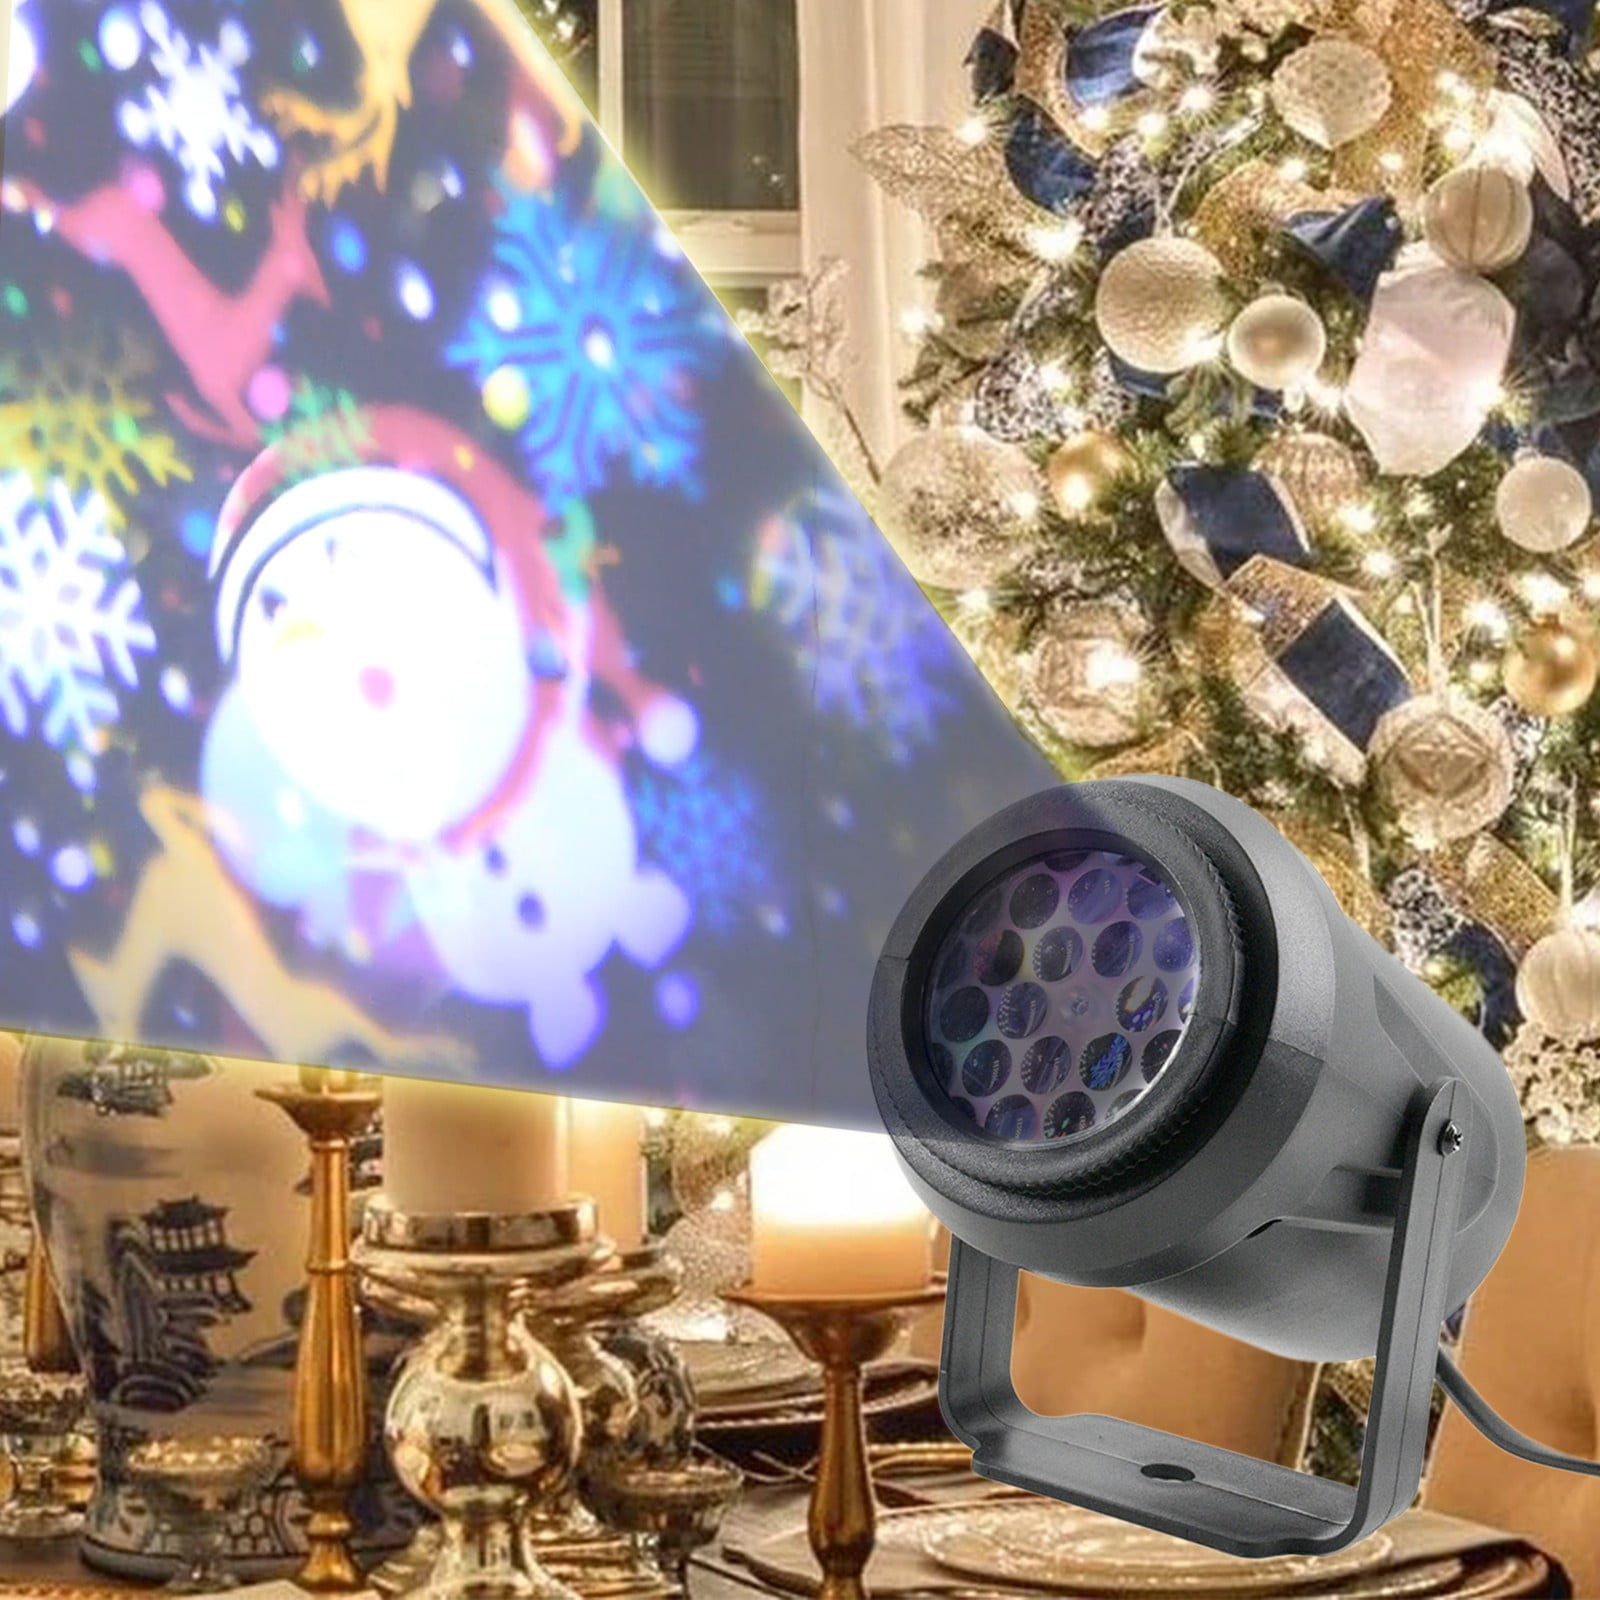 Details about   Snowfall Christmas Lights Projector Outdoor Rotating Minetom LED Waterproof 